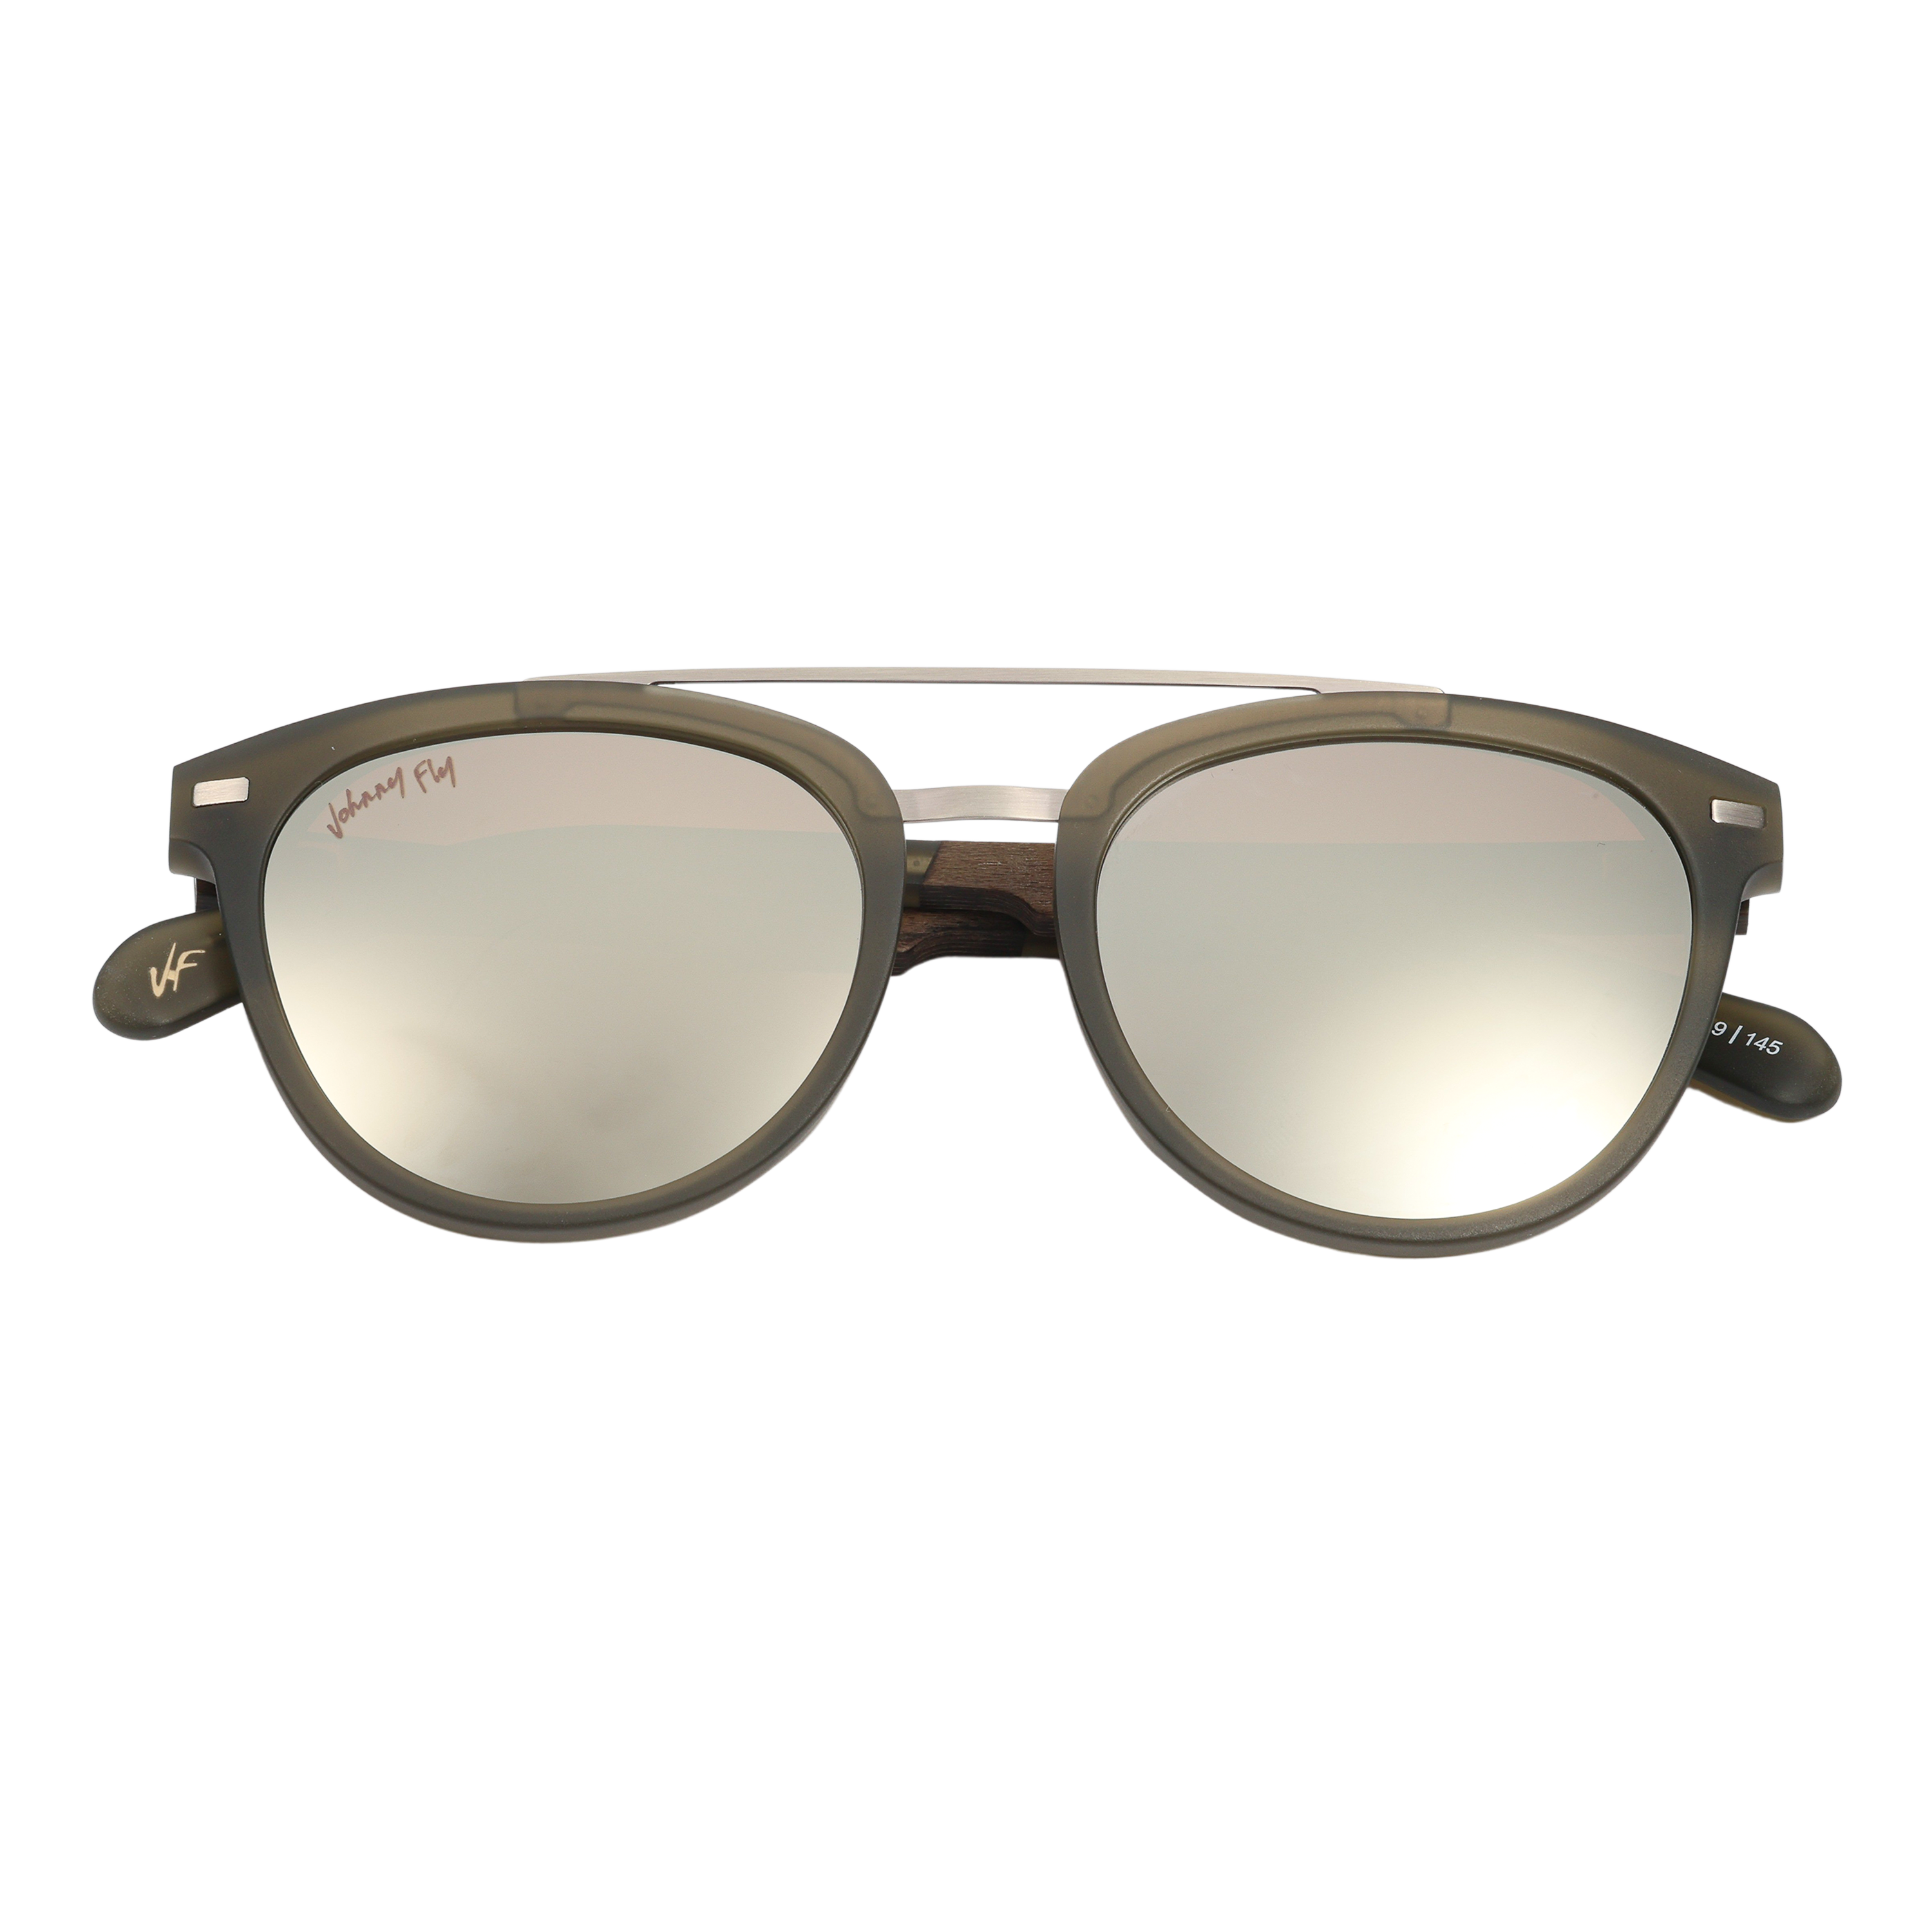 Captain SANDED OLIVE Crossbar Aviator mirror Polarized Sunglasses by Johnny Fly | Handcrafted with Acetate and Wood  